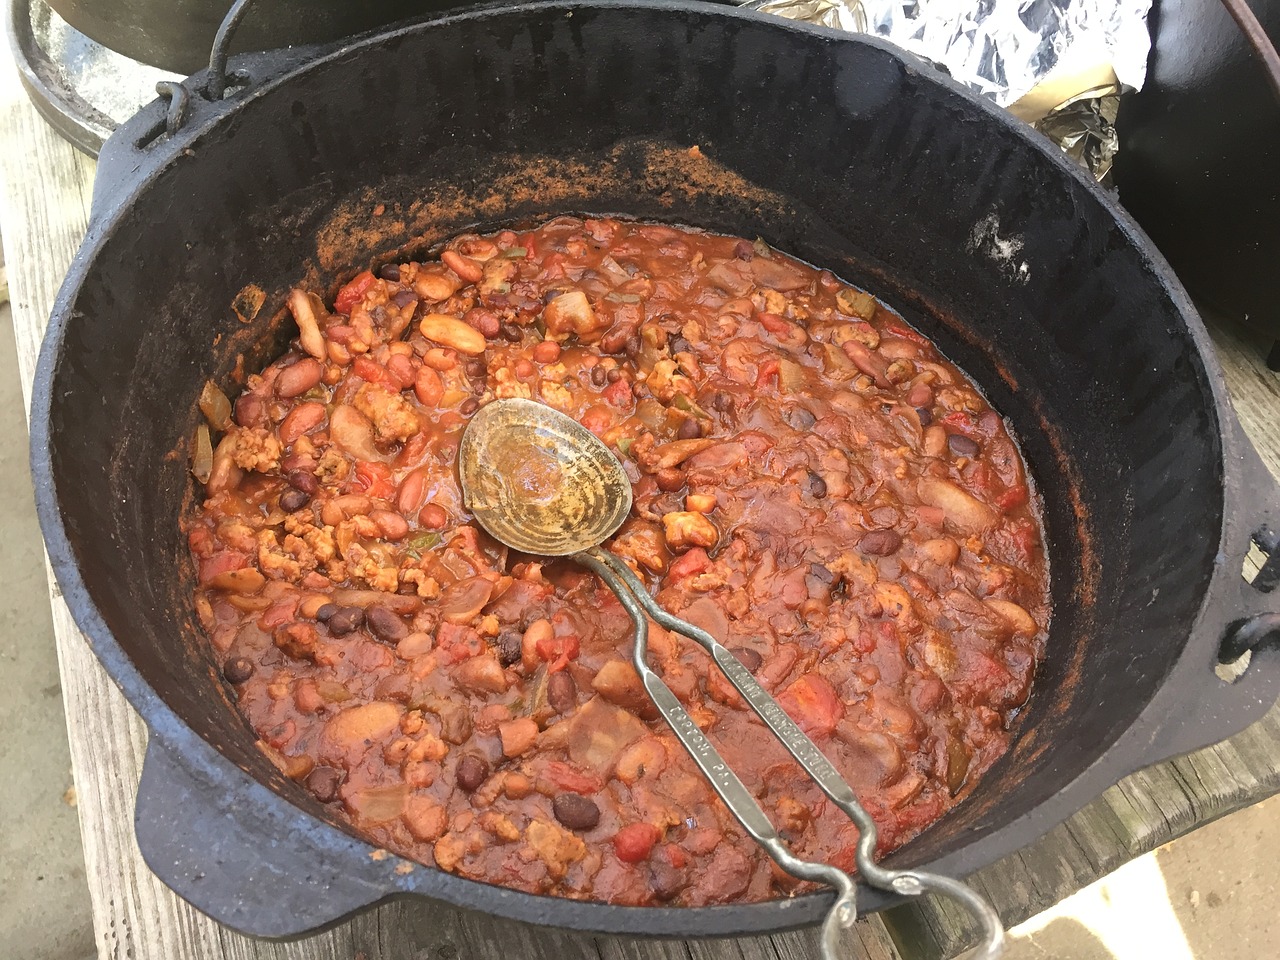 Beans,camping,dutch oven,free pictures, free photos - free image